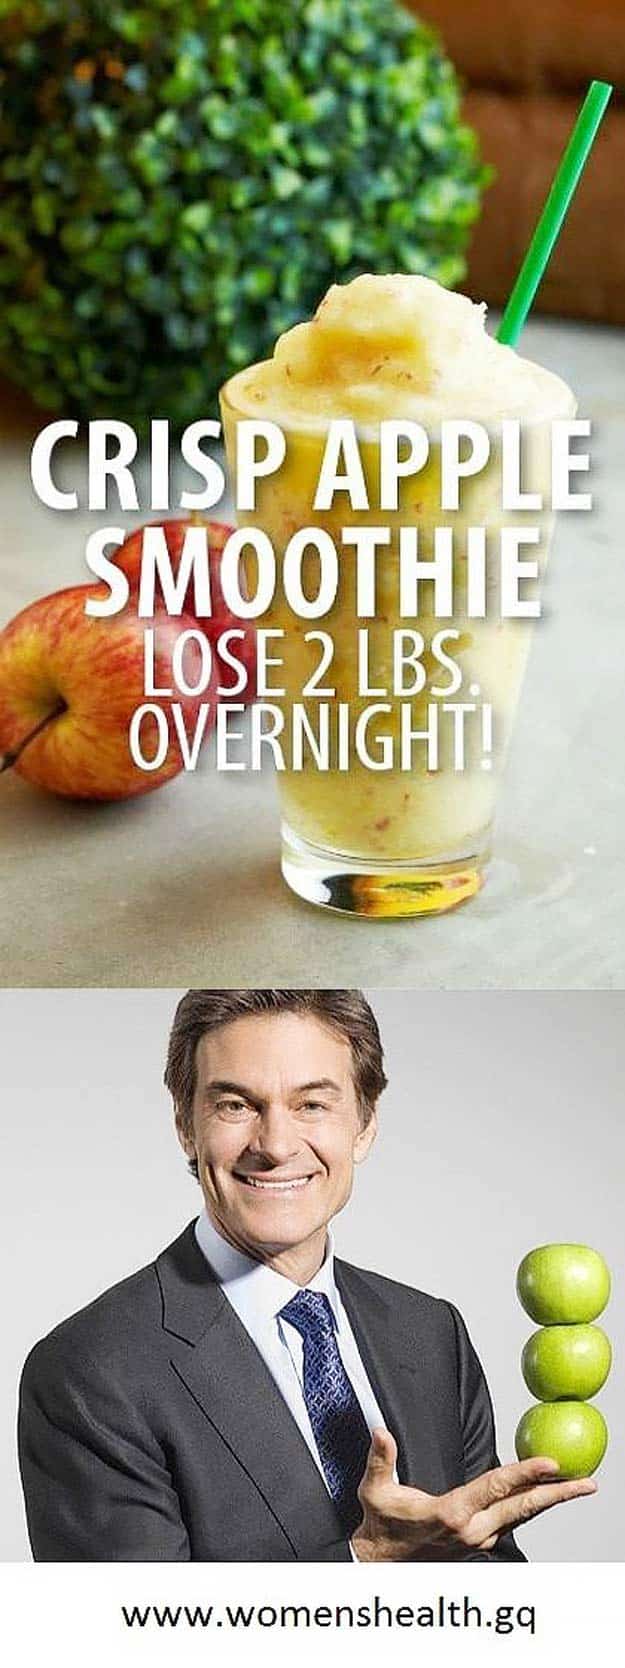 Healthy smoothie recipes and easy ideas perfect for breakfast, energy. Low calorie and high protein recipes for weightloss and to lose weight. Simple homemade recipe ideas that kids love. | Dr Oz Crispy Apple Smoothie Recipe + Shrink Drinks Rapid Weight Loss #smoothies #recipess